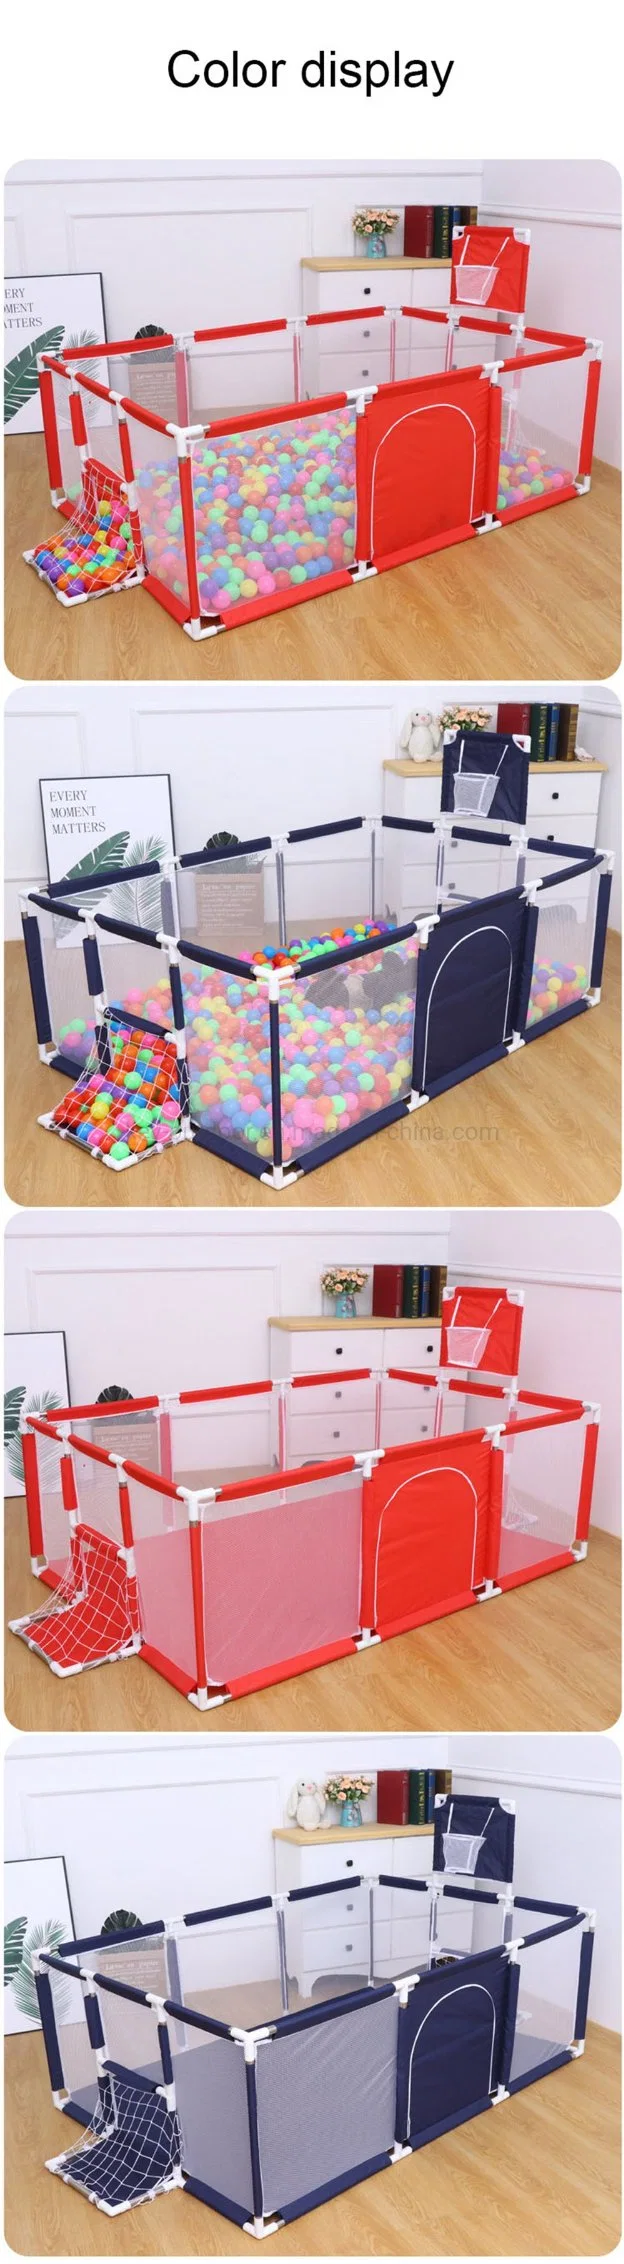 Children Colorful Plastic Indoor Play Yard Swing and Slide Safety Folding Fences Game Playpen for Kids Baby Folding Fence